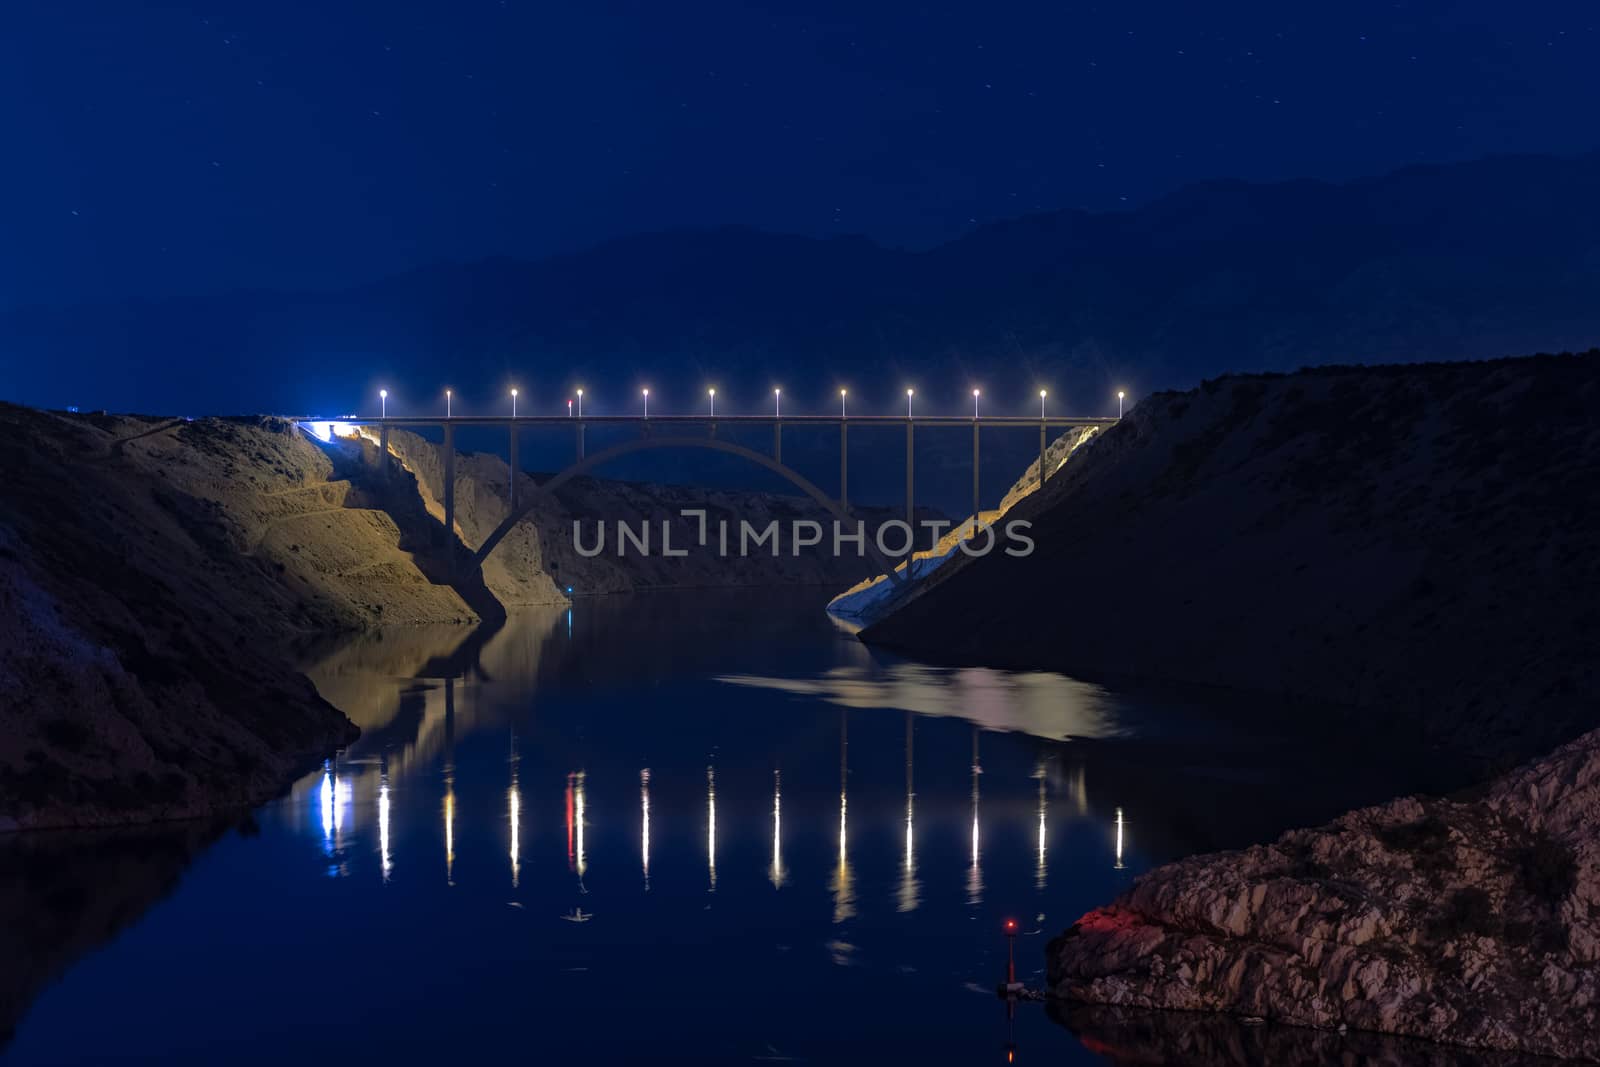 Illuminated highway bridge under stars, reflection of lights in water, mountains in background and bright stars in sky, Maslenica, Croatia